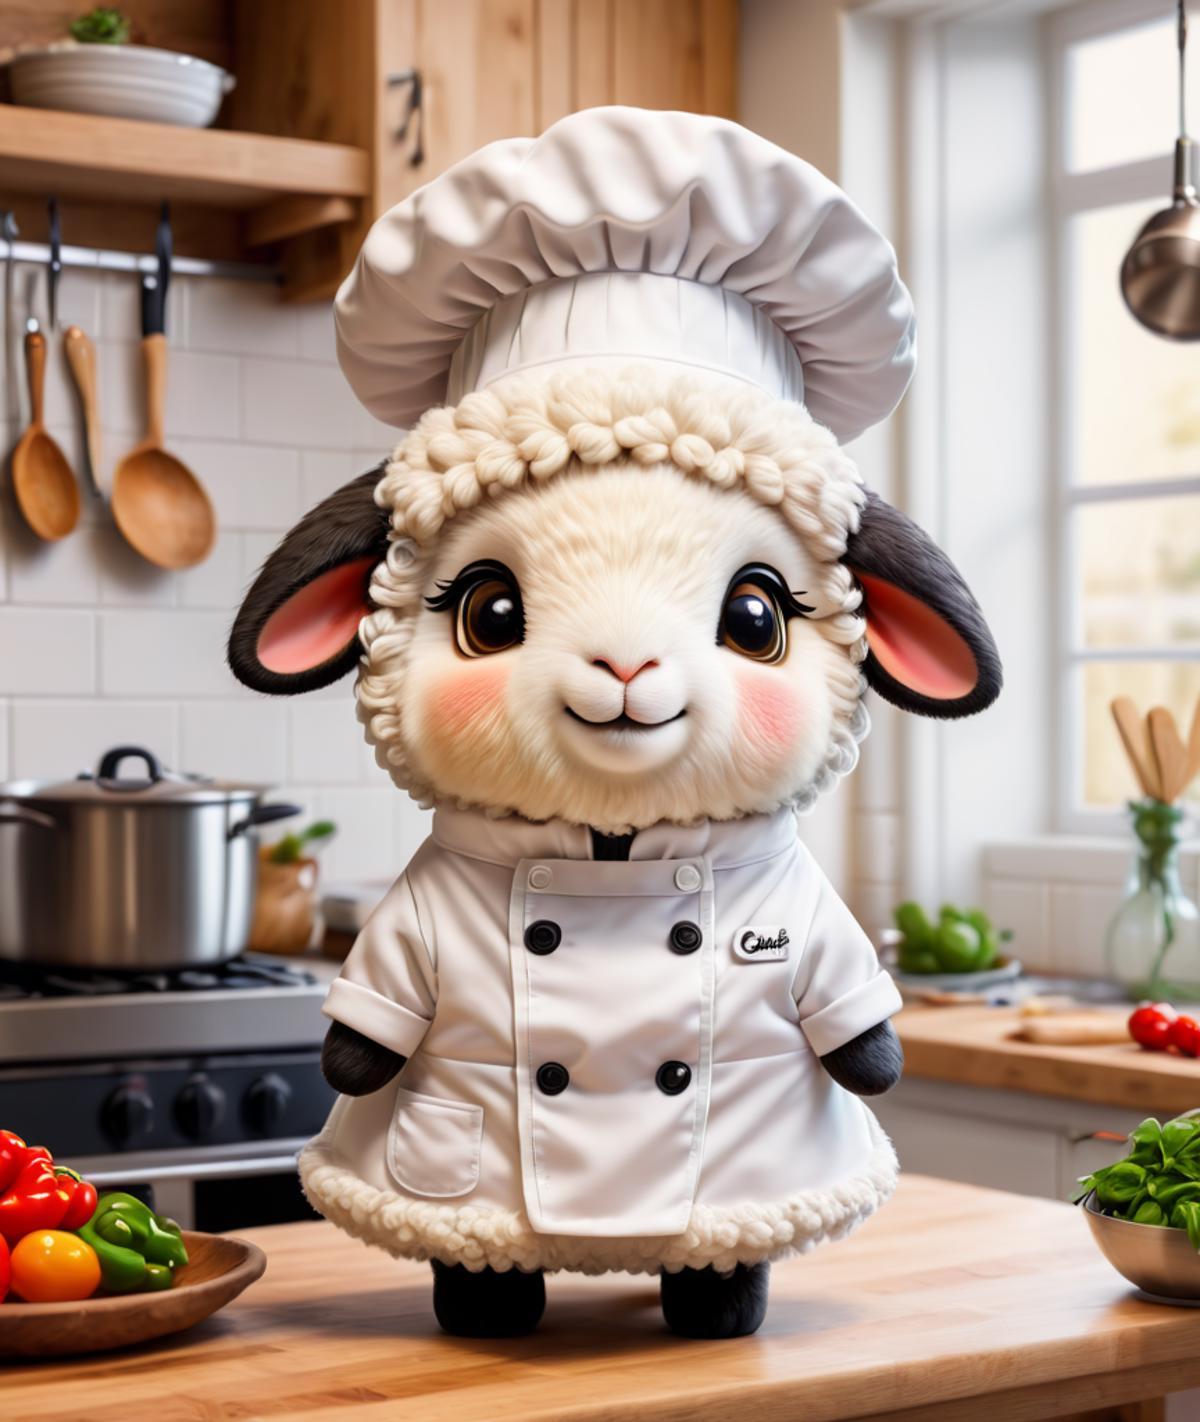 A small stuffed sheep wearing a chef's outfit and standing in a kitchen.